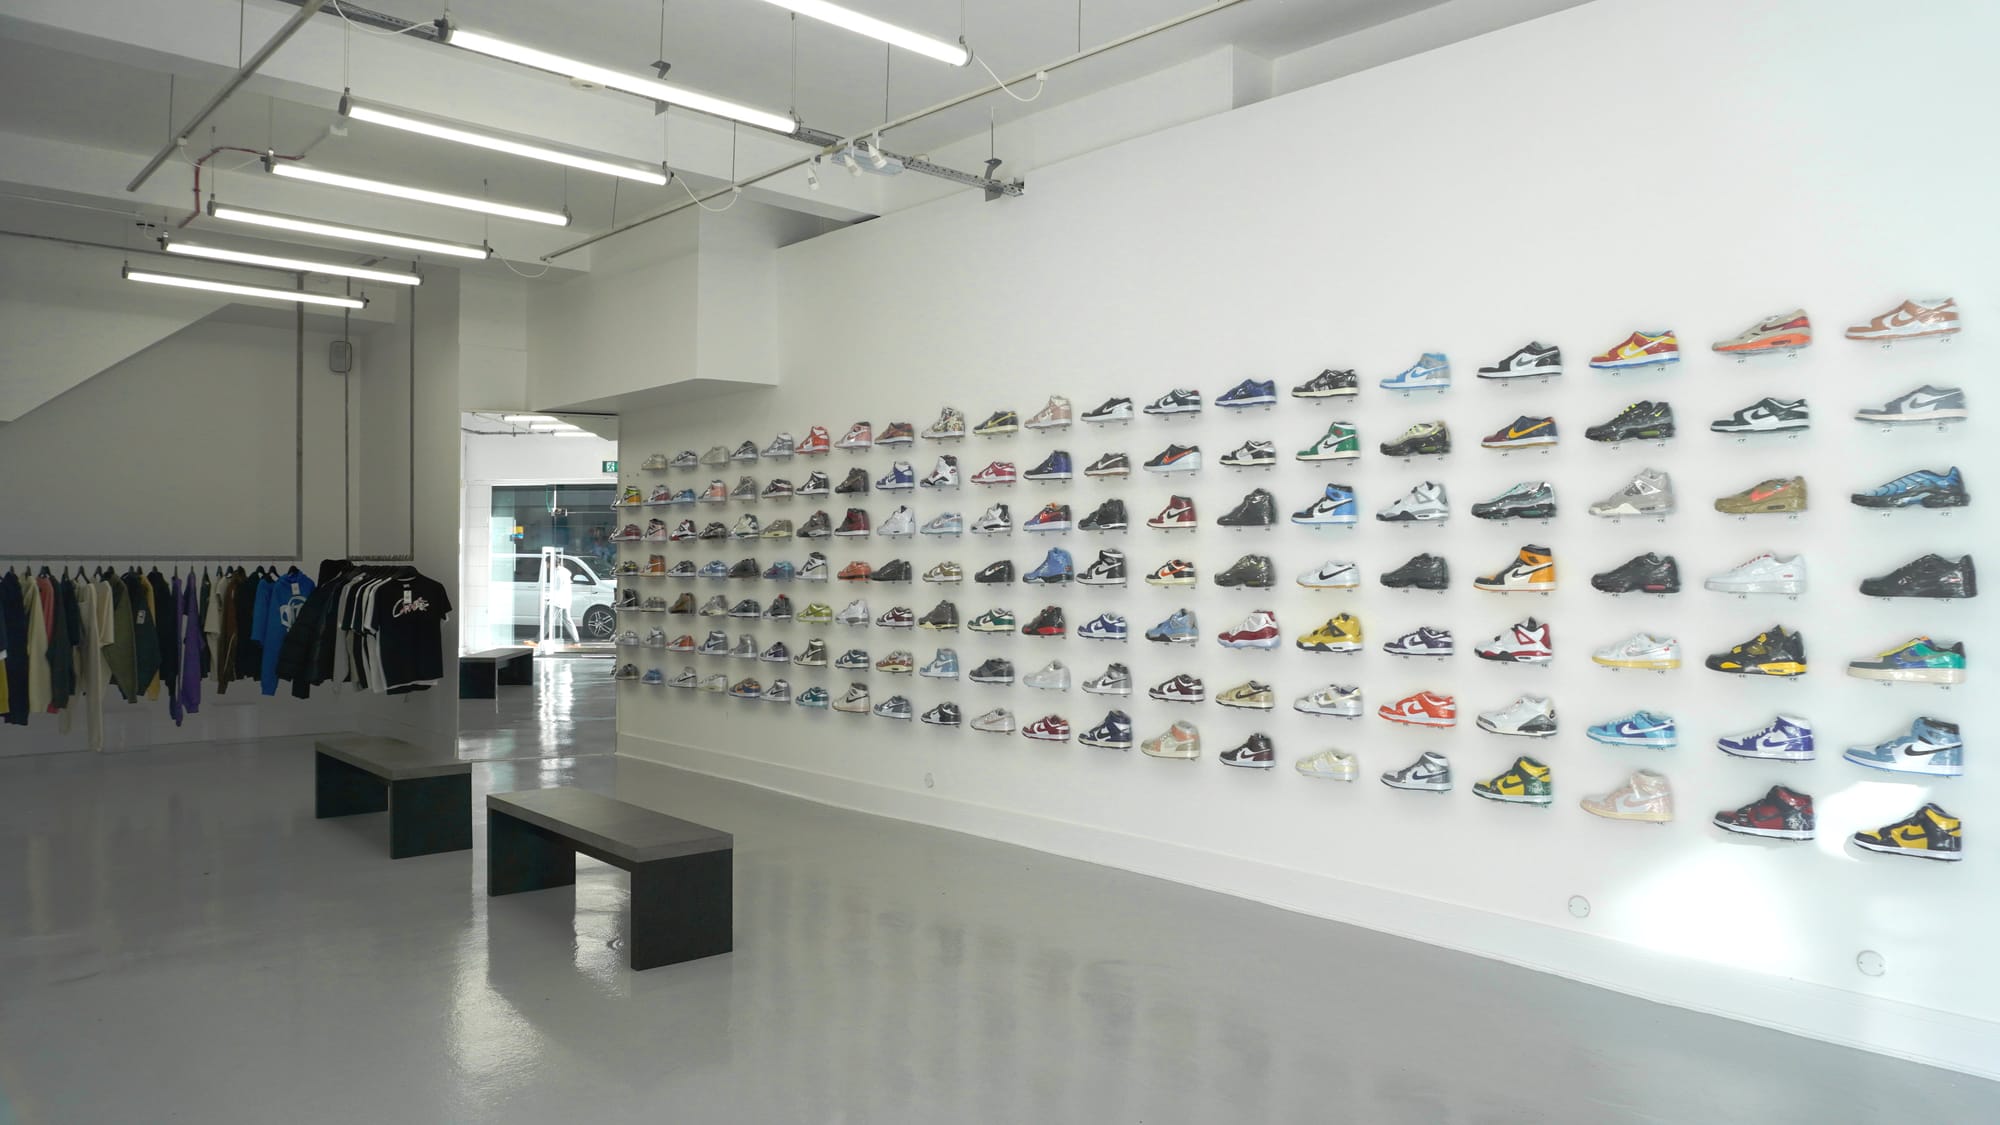 An image of the Side Kicks store. It shows a white wall filled with dozens of sneakers on display.